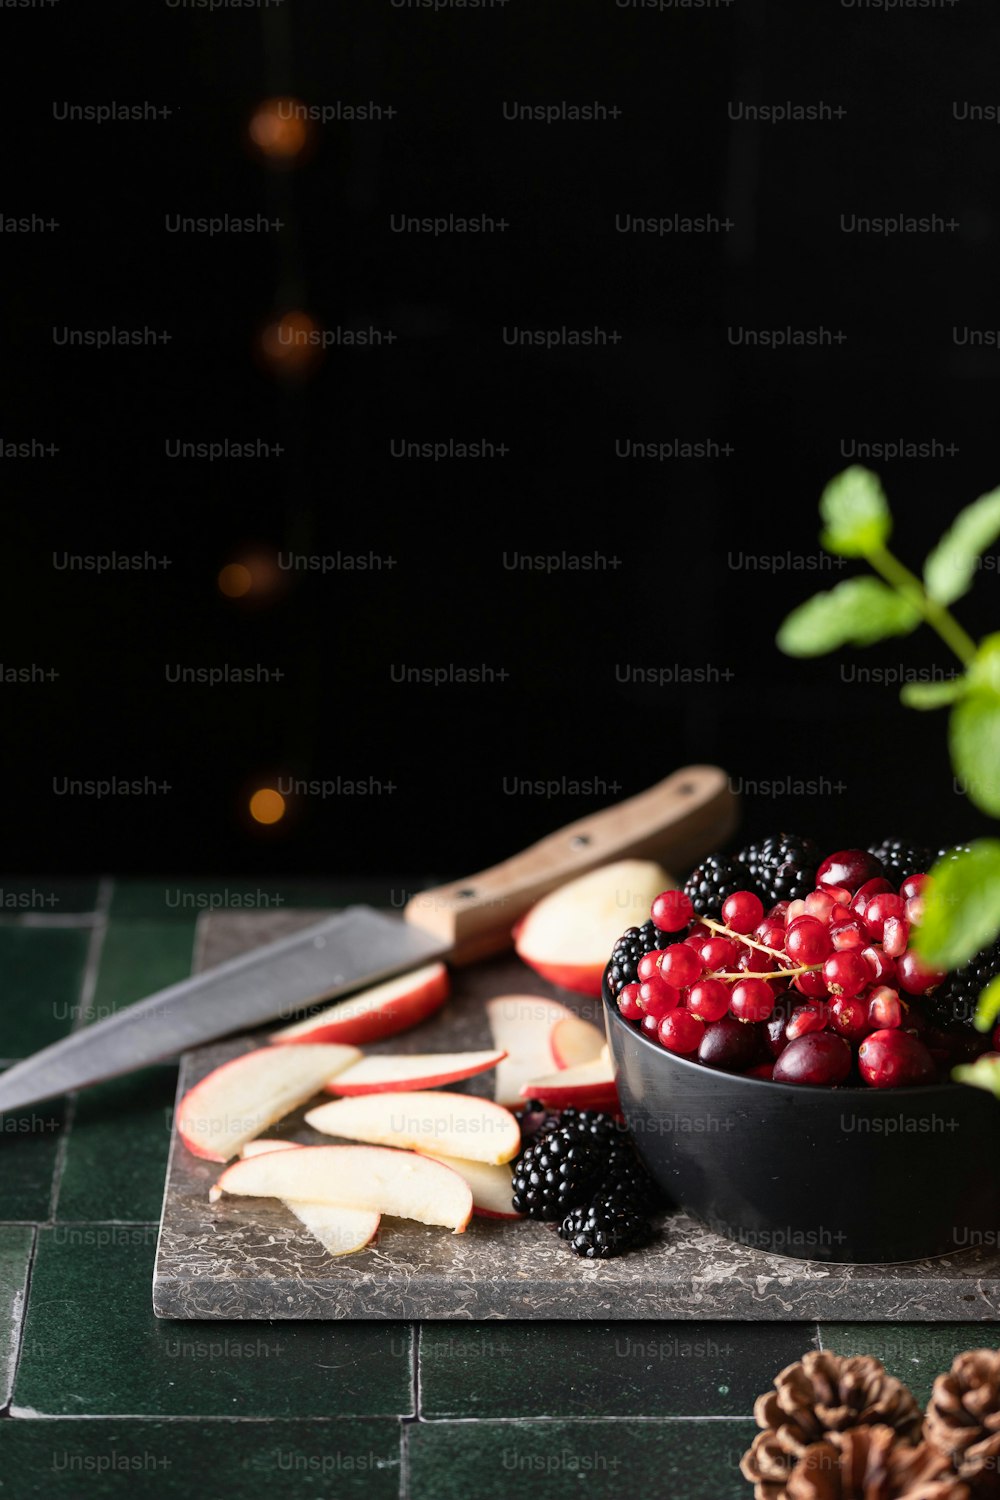 a bowl of berries, apples, and a knife on a cutting board